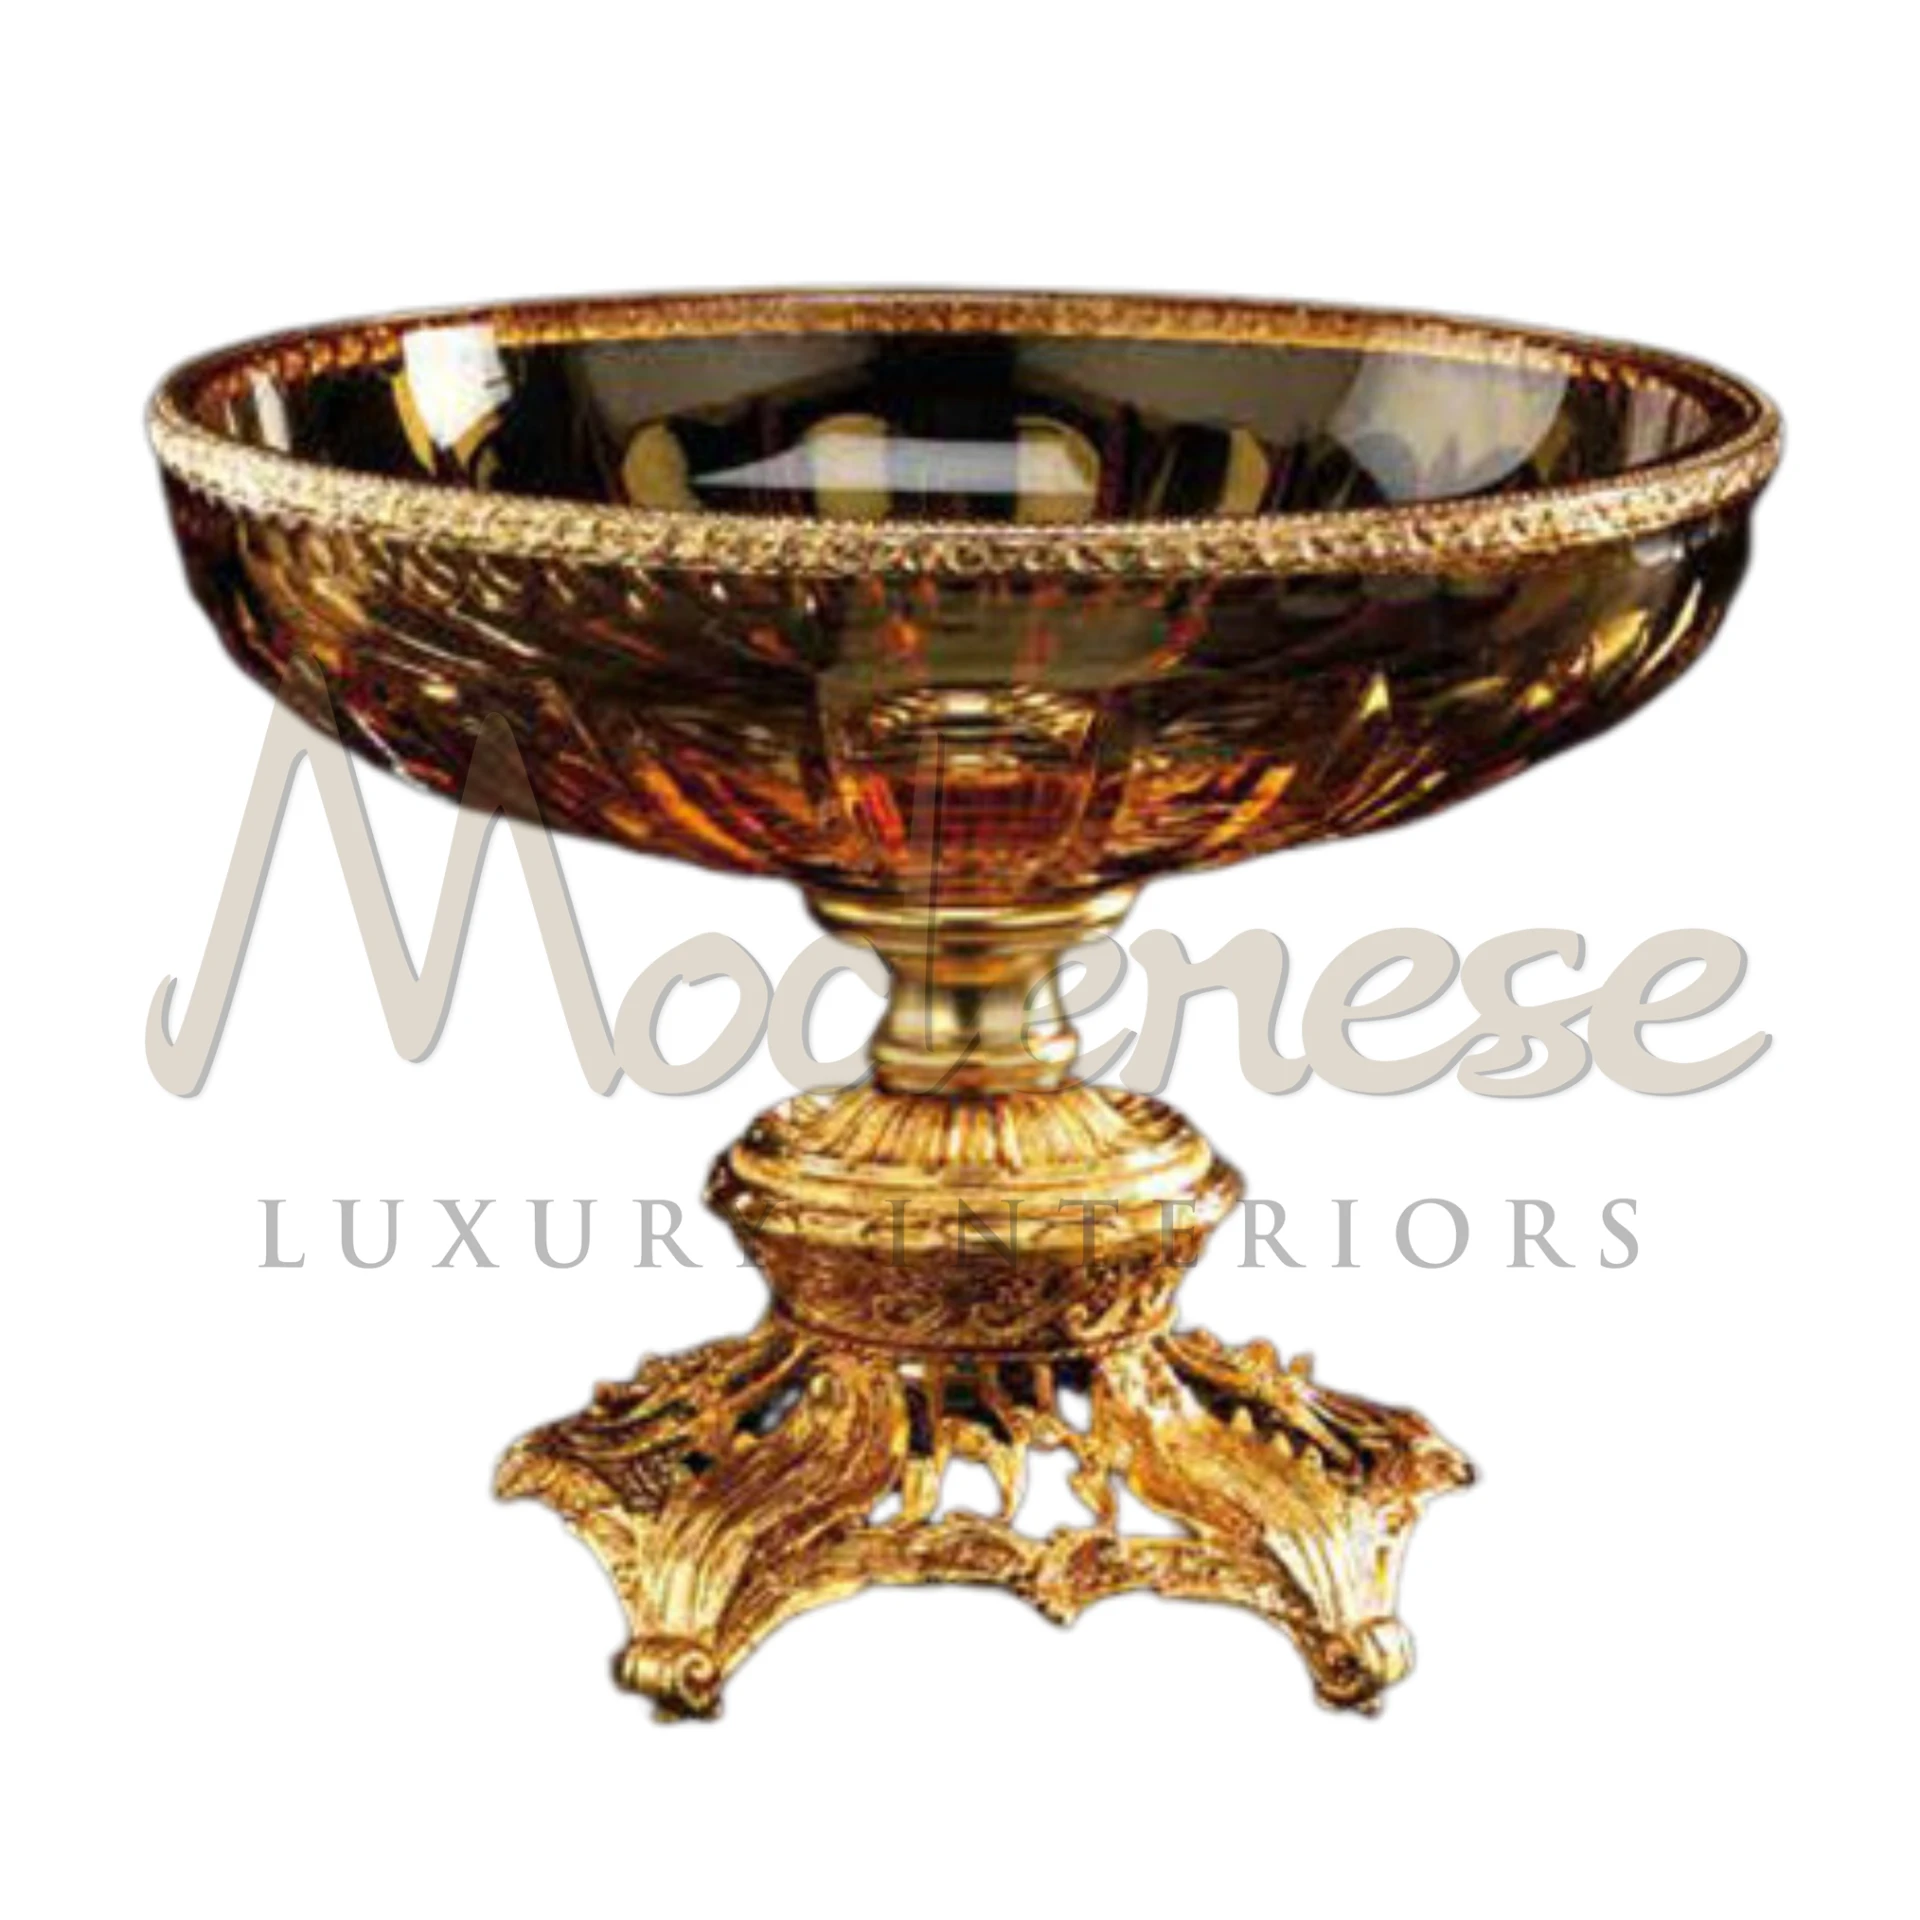 Luxurious crystal vase with gold base, blending classic and baroque elegance, ideal for sophisticated interior design.
